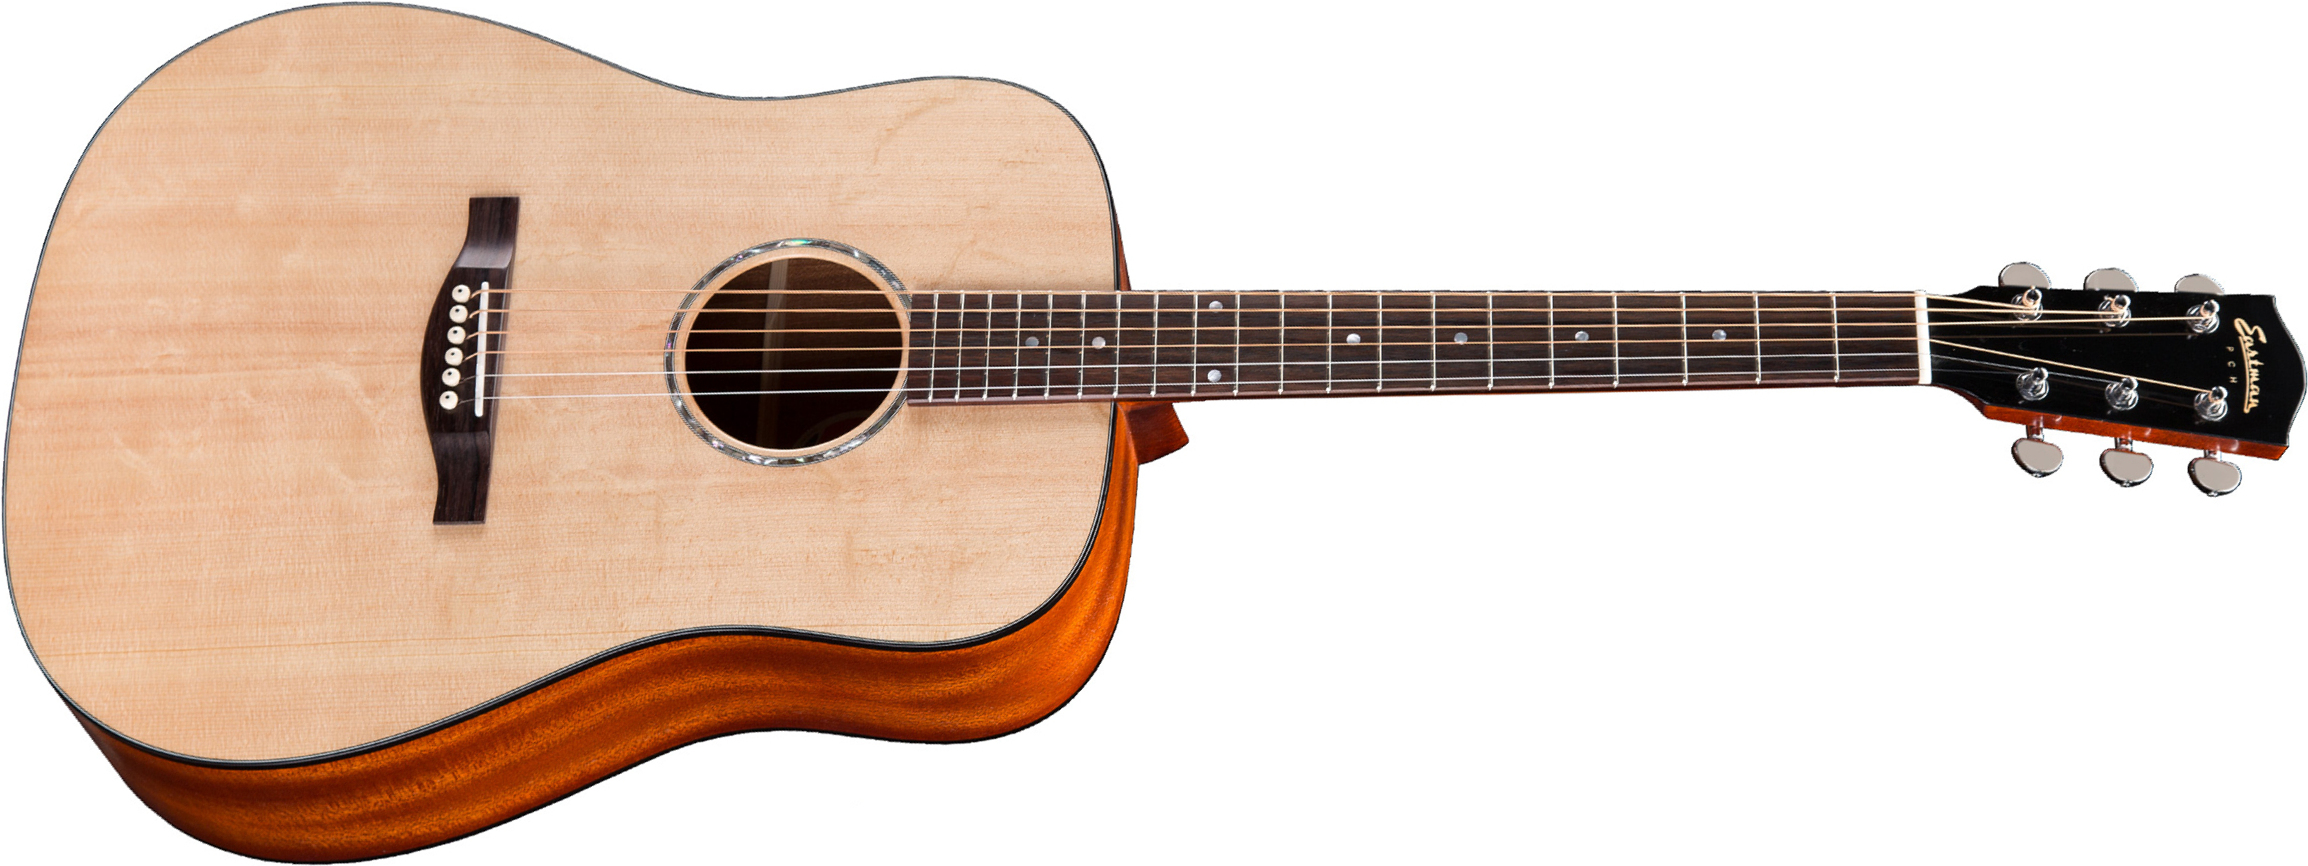 Eastman Pch1-d Dreadnought Epicea Sapele Rw - Natural Satin - Westerngitarre & electro - Main picture